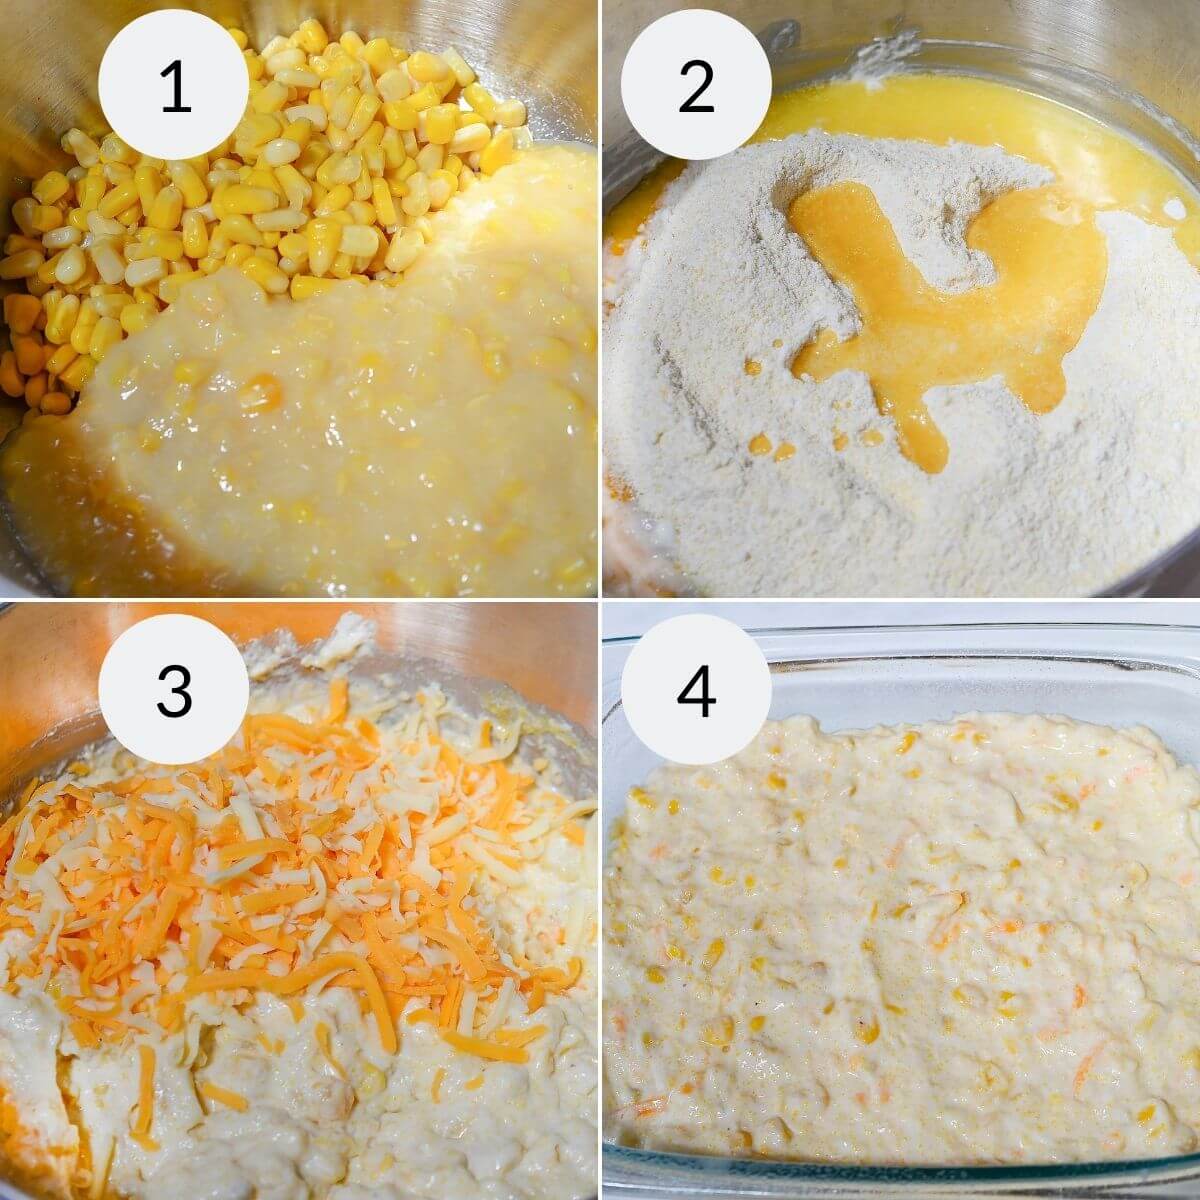 Mixing the corn, cheese and ingredients to make the casserole.